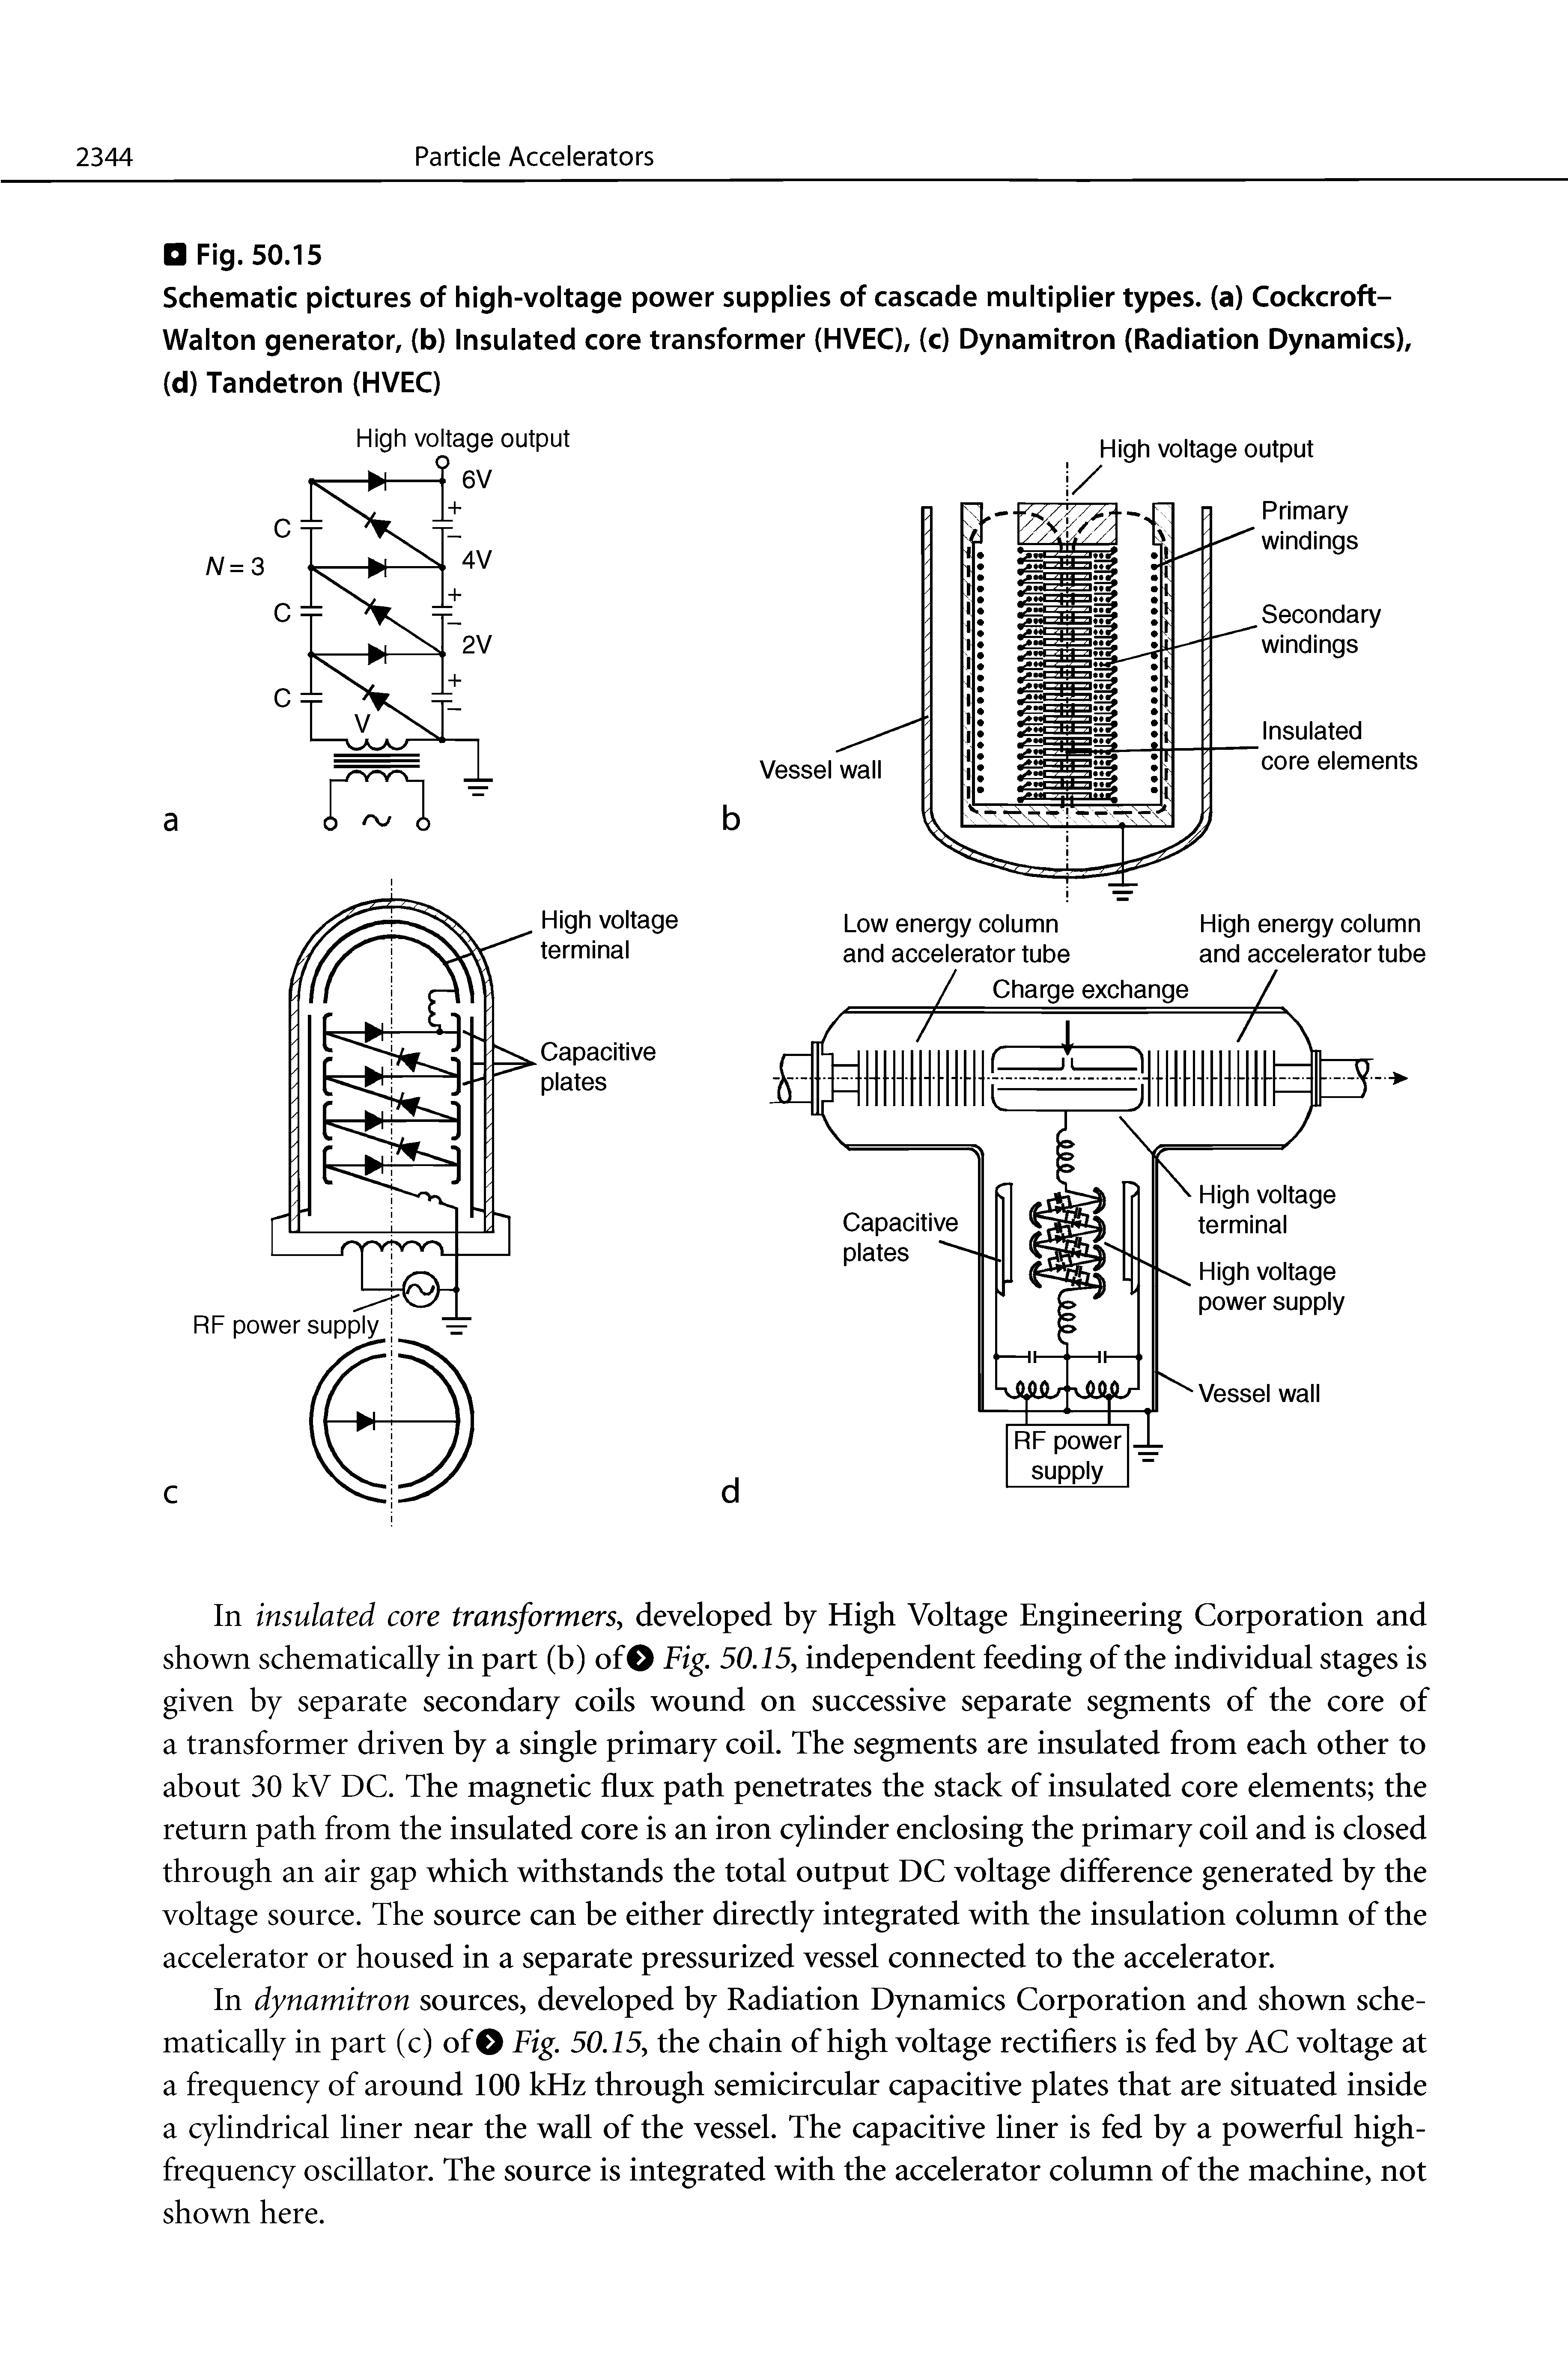 Schematic pictures of high-voltage power supplies of cascade multiplier types, (a) Cockcroft-Walton generator, (b) Insulated core transformer (HVEC), (c) Dynamitron (Radiation Dynamics), (d) Tandetron (HVEC)...